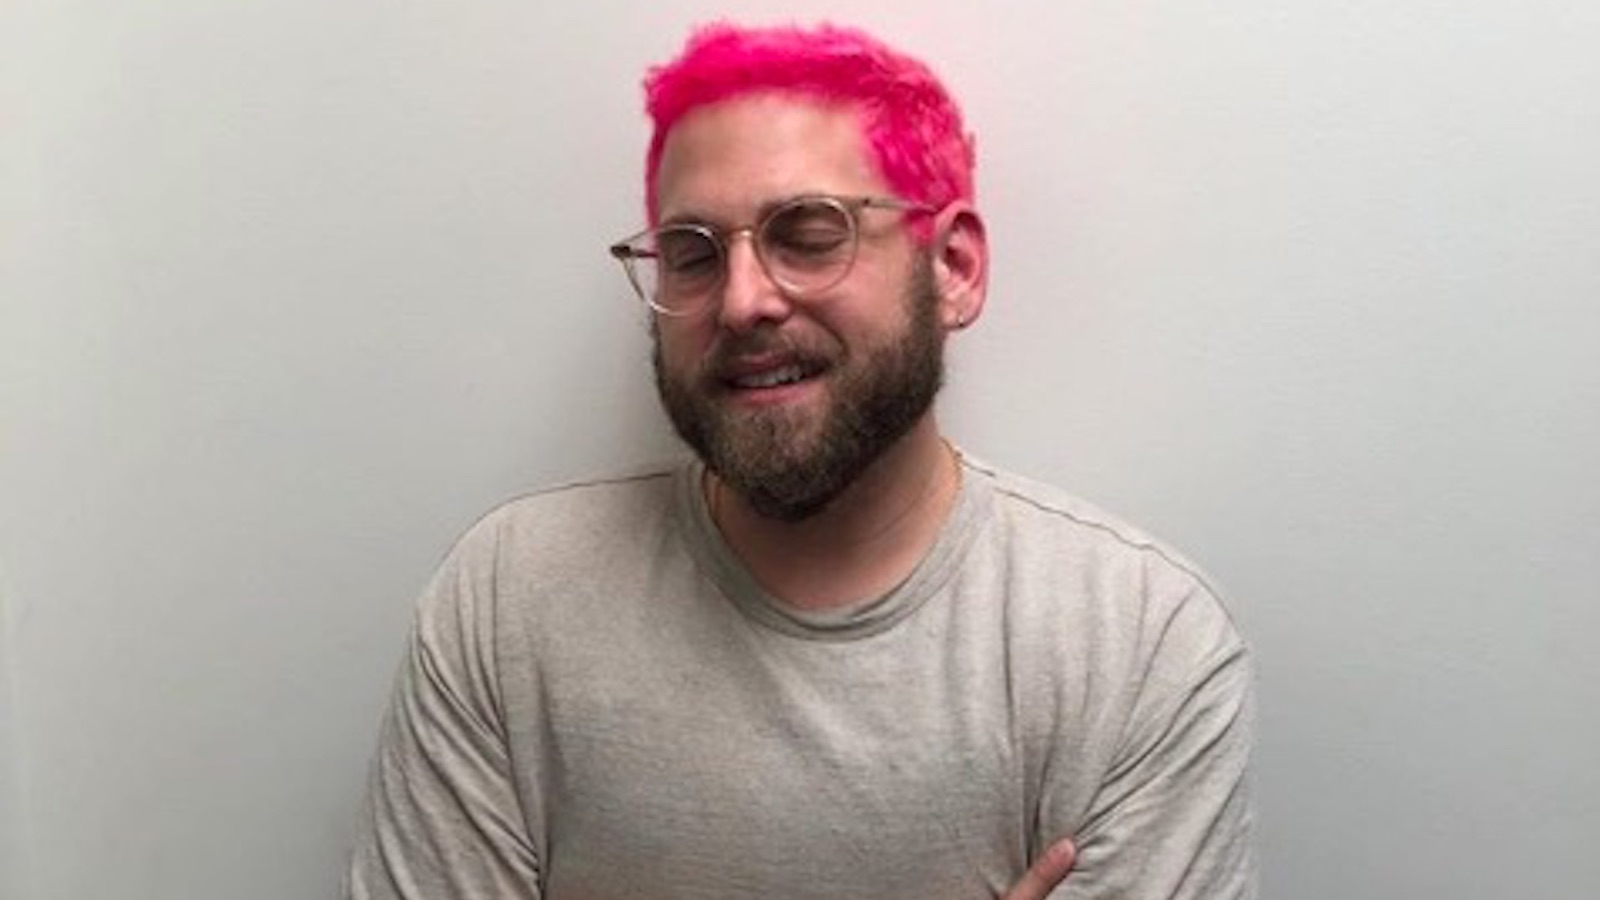 The internet is losing it over Jonah Hill's pink hair, and we swear it's  now the new dye job for Summer